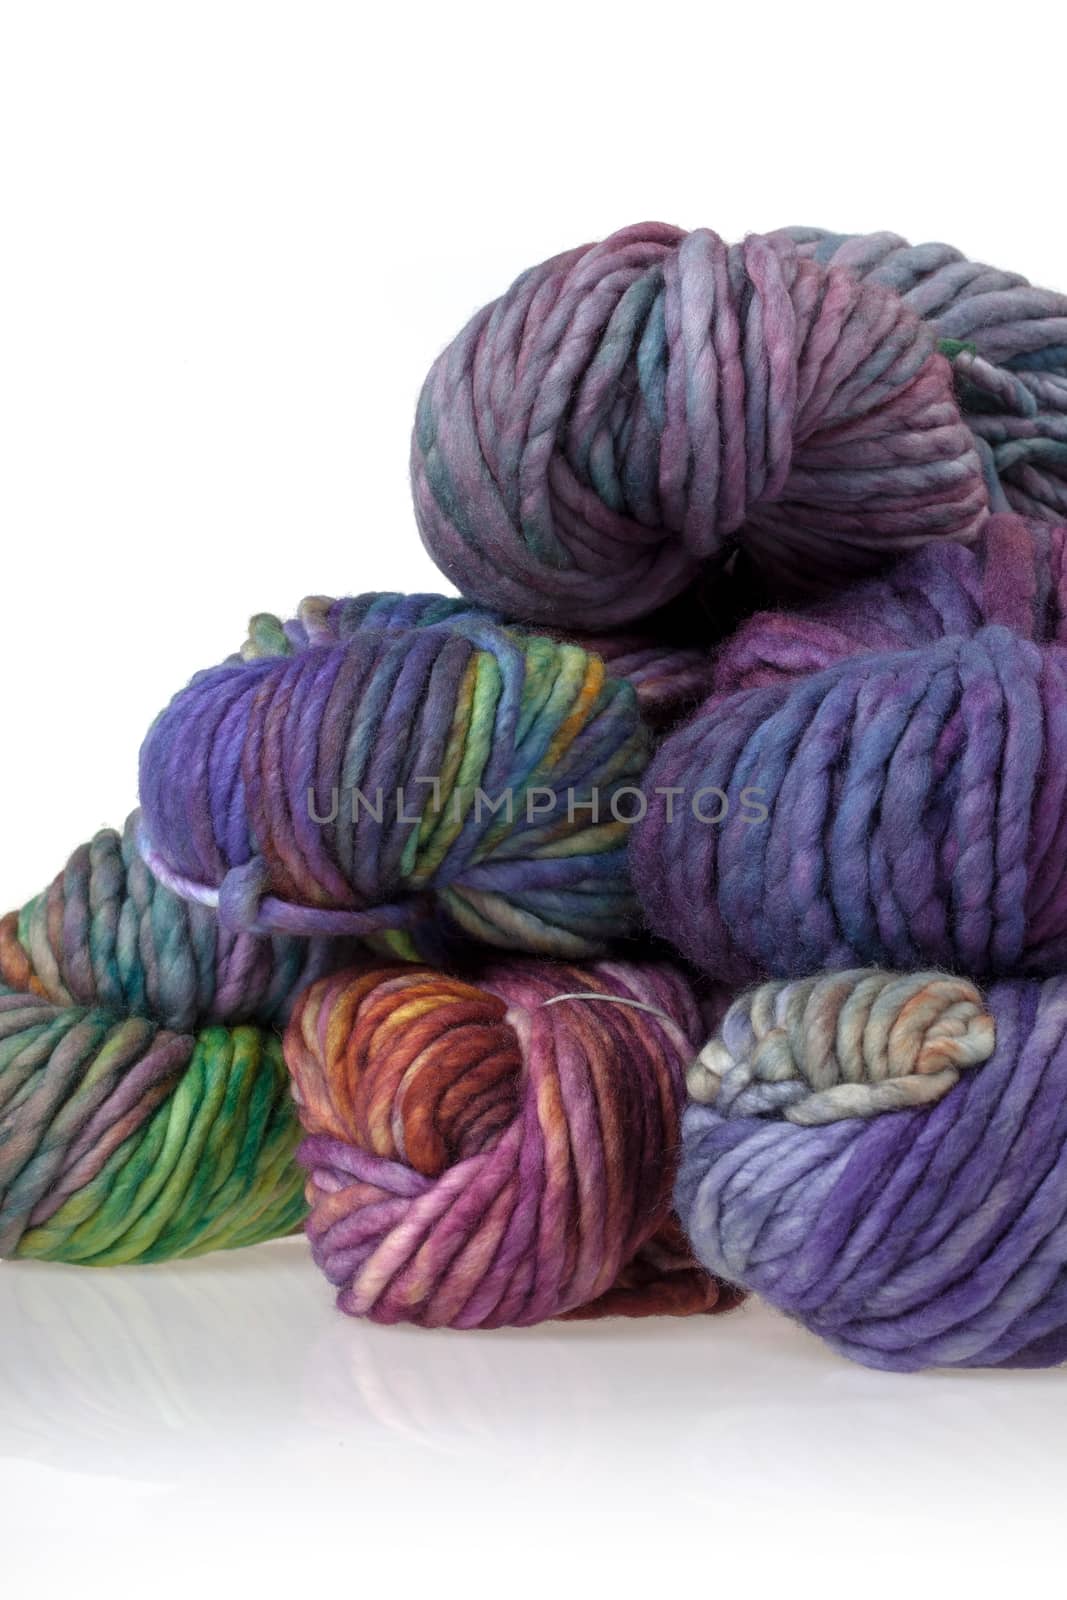 Set of colorful wool yarn balls. Hanks are set out in a pile.